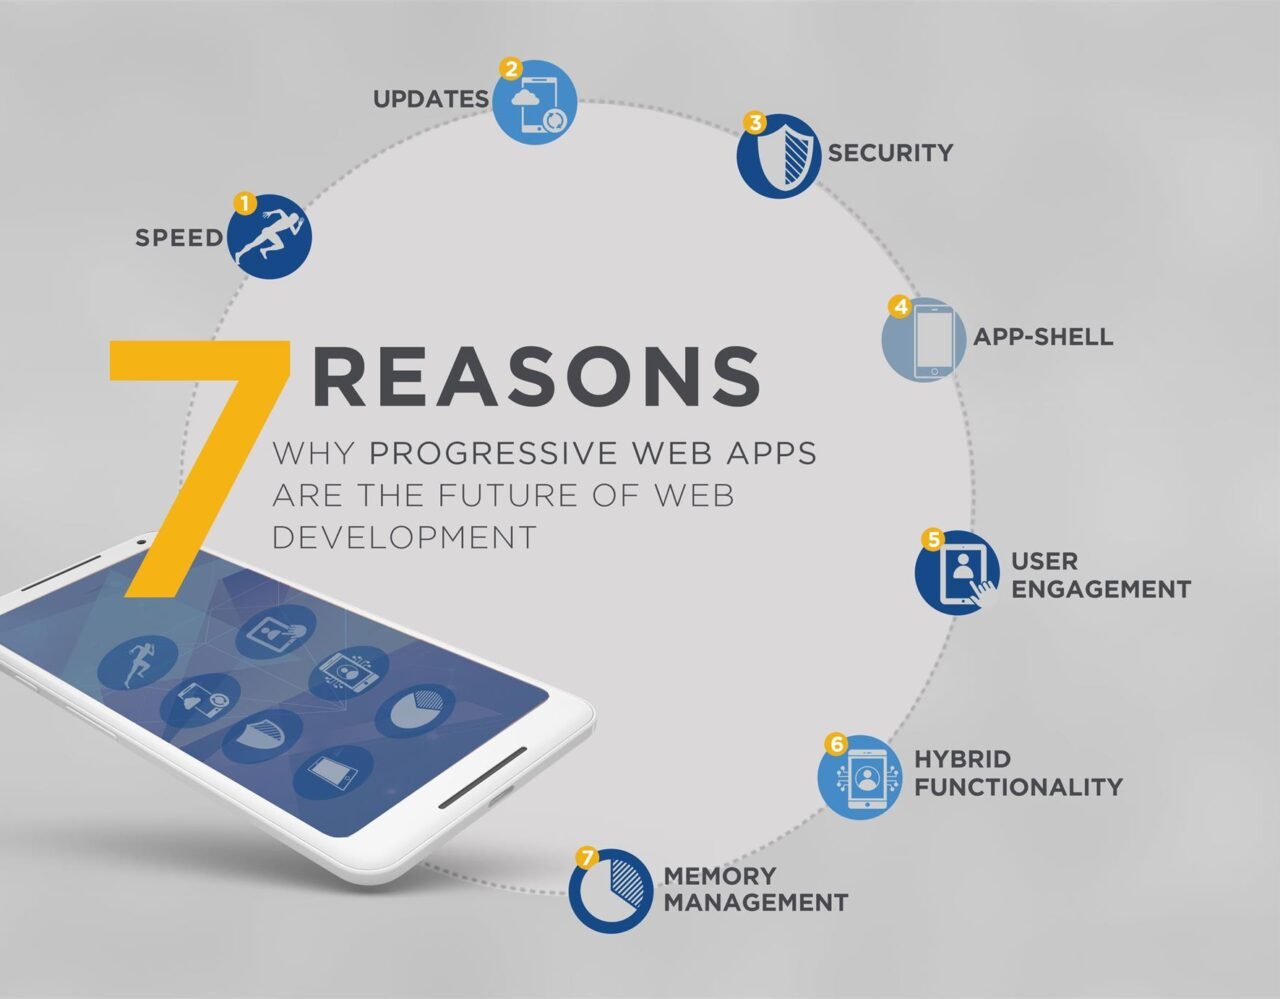 Progressive Web App - reasons why they are the future trend